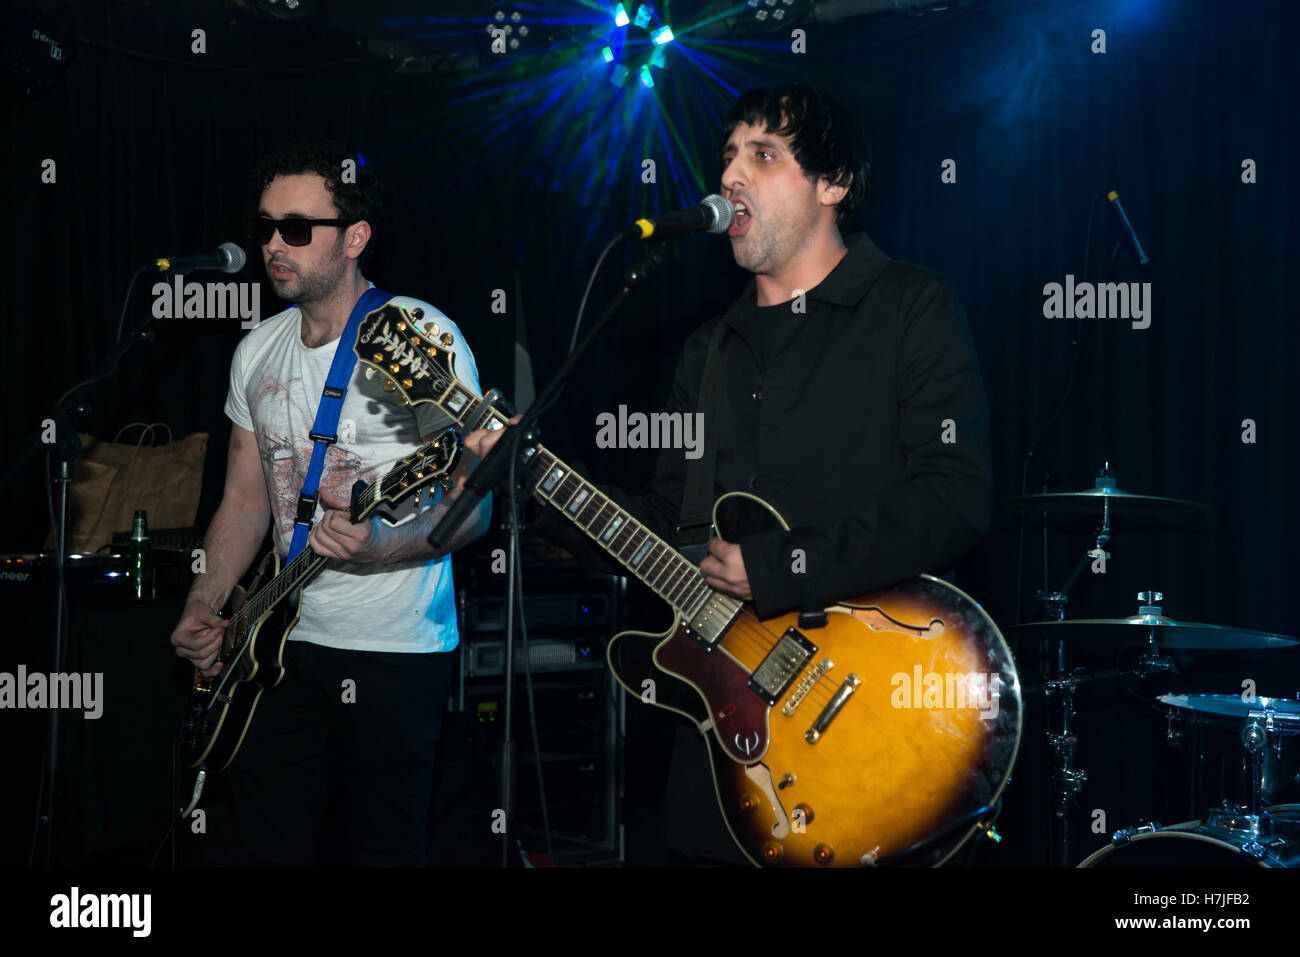 London, UK. 05th Nov, 2016. Indie rock band Alias Kid perform at Water Rats for This Feeling. The Mancunian band is comprised of Maz Behdjet (Vocals, Guitar), Sean O'Donnell (Guitar, Vocals), Nick Repton (Bass guitar), James Sweeney (Lead Guitar, Backing Vocals) and Colin Ward (Drums). Credit:  Alberto Pezzali/Pacific Press/Alamy Live News Stock Photo